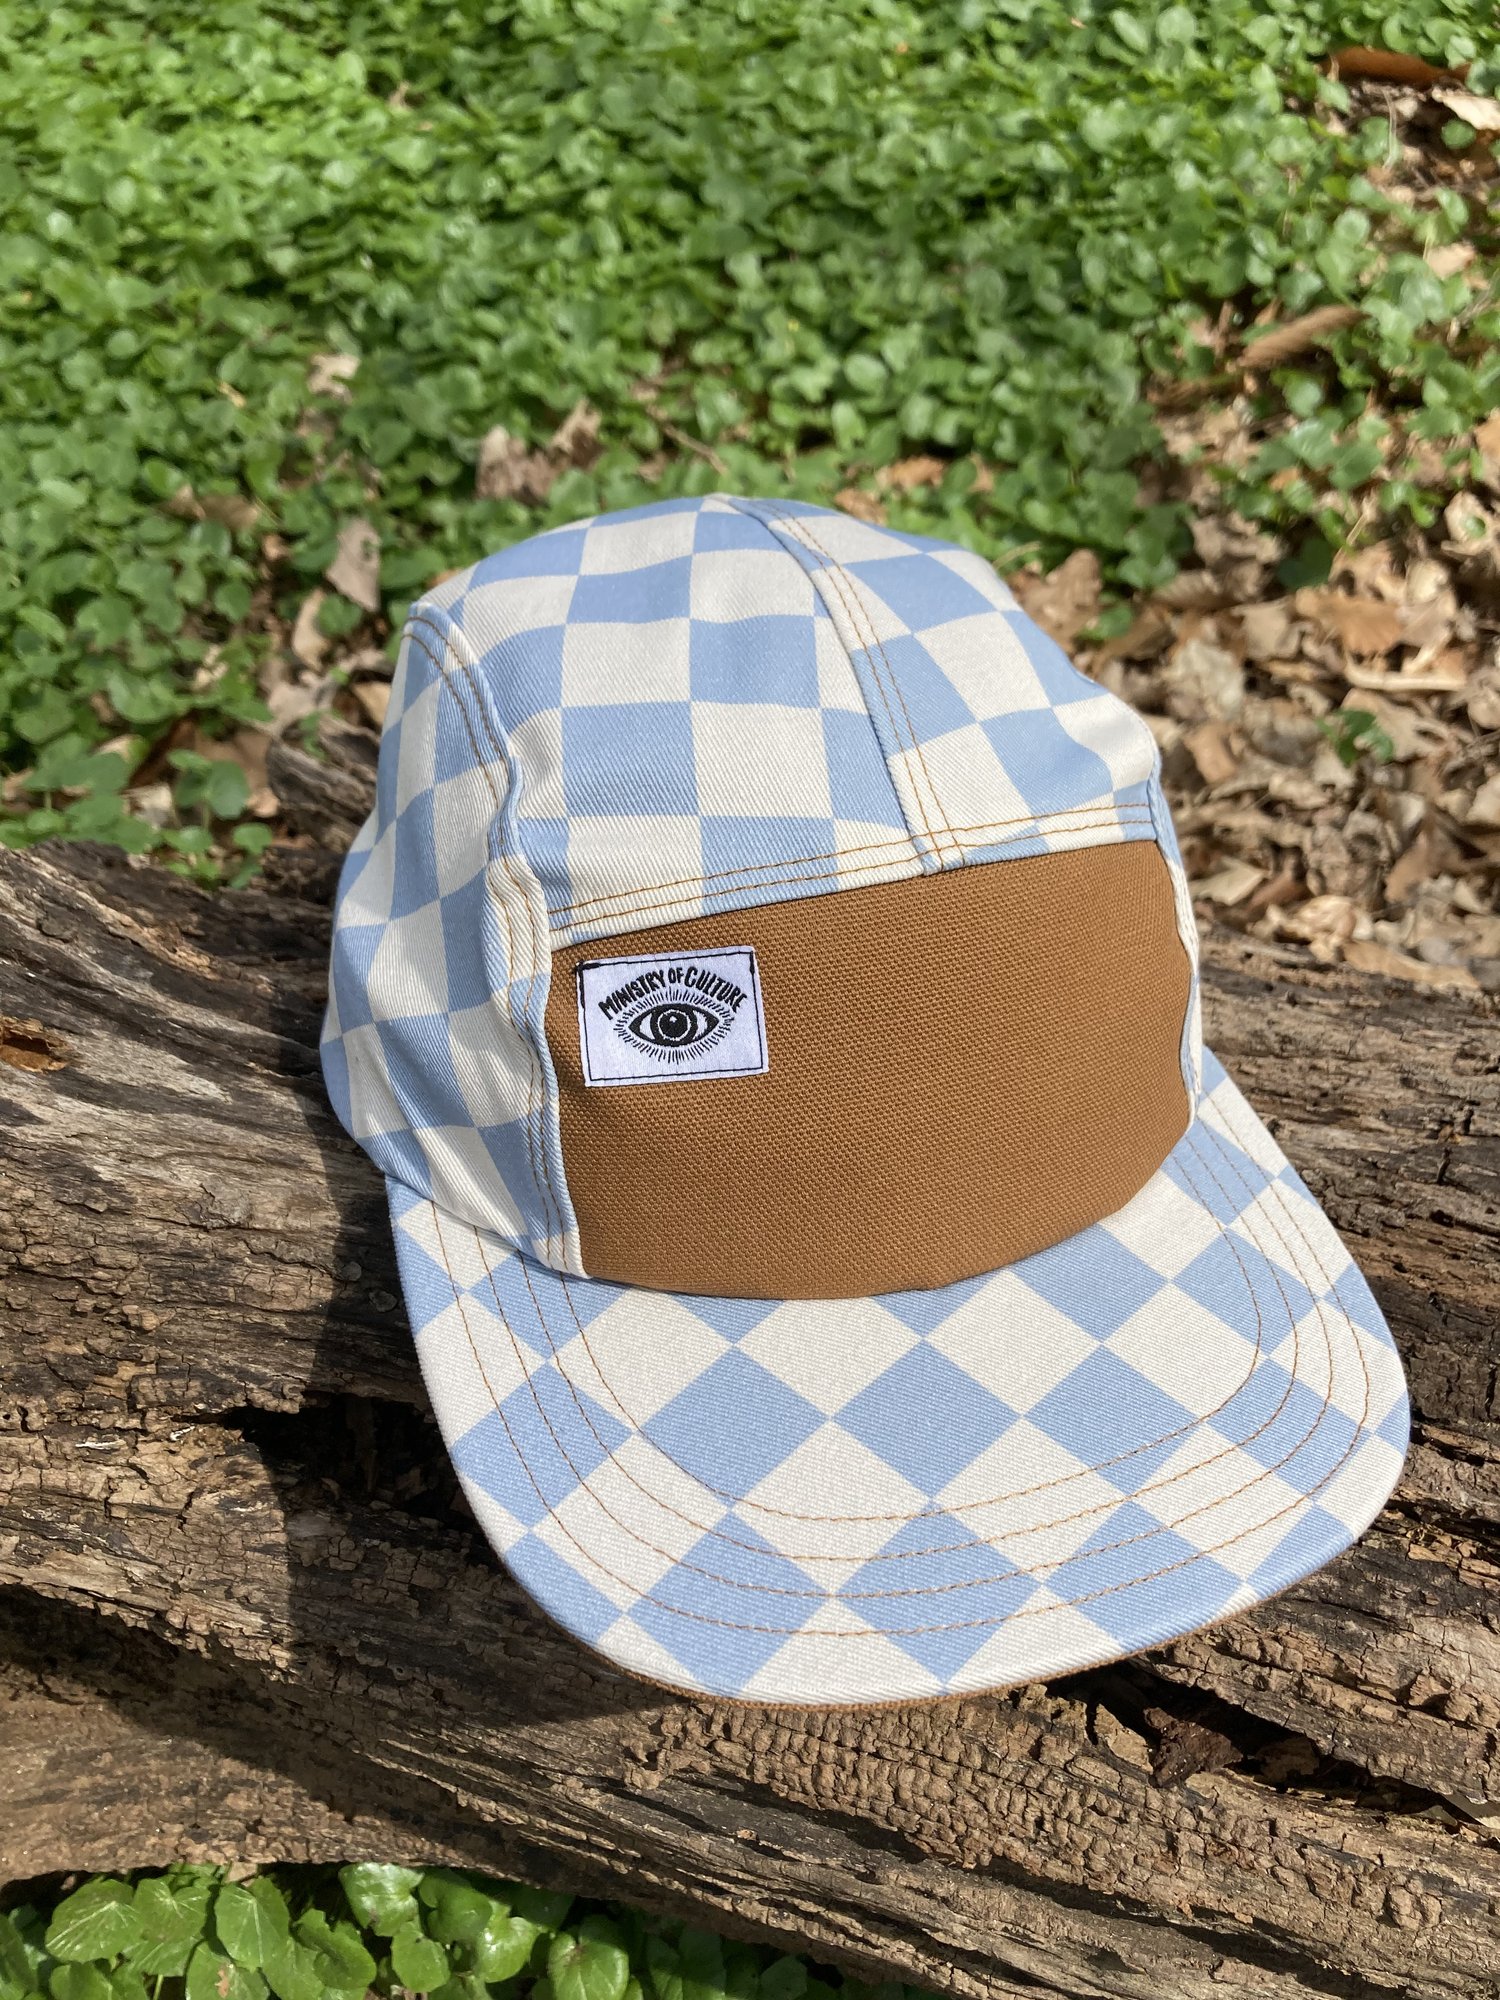 Ministry of Culture - Handmade 5 Camp Hat, Baby Blue and Plaid Checkerboard